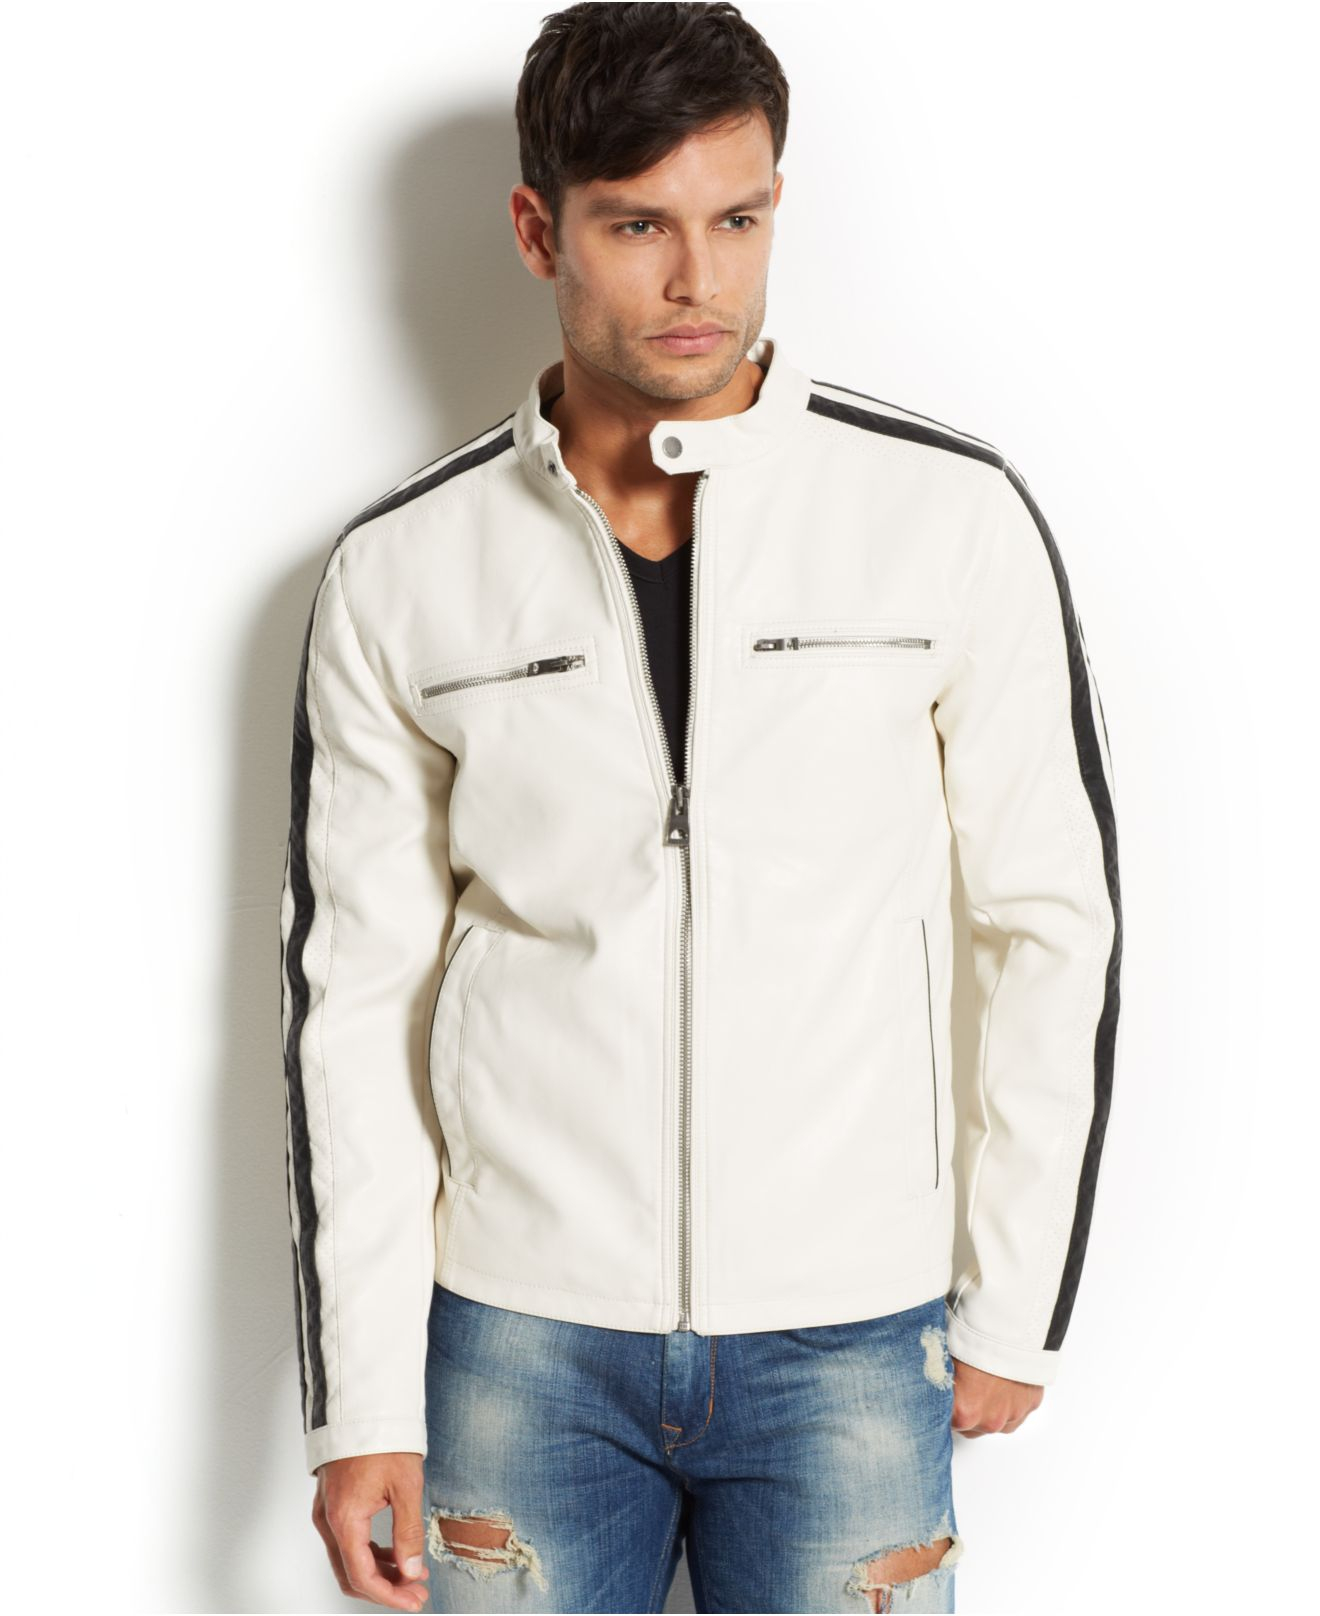 Guess Faux-Leather Moto Jacket in White for Men - Lyst